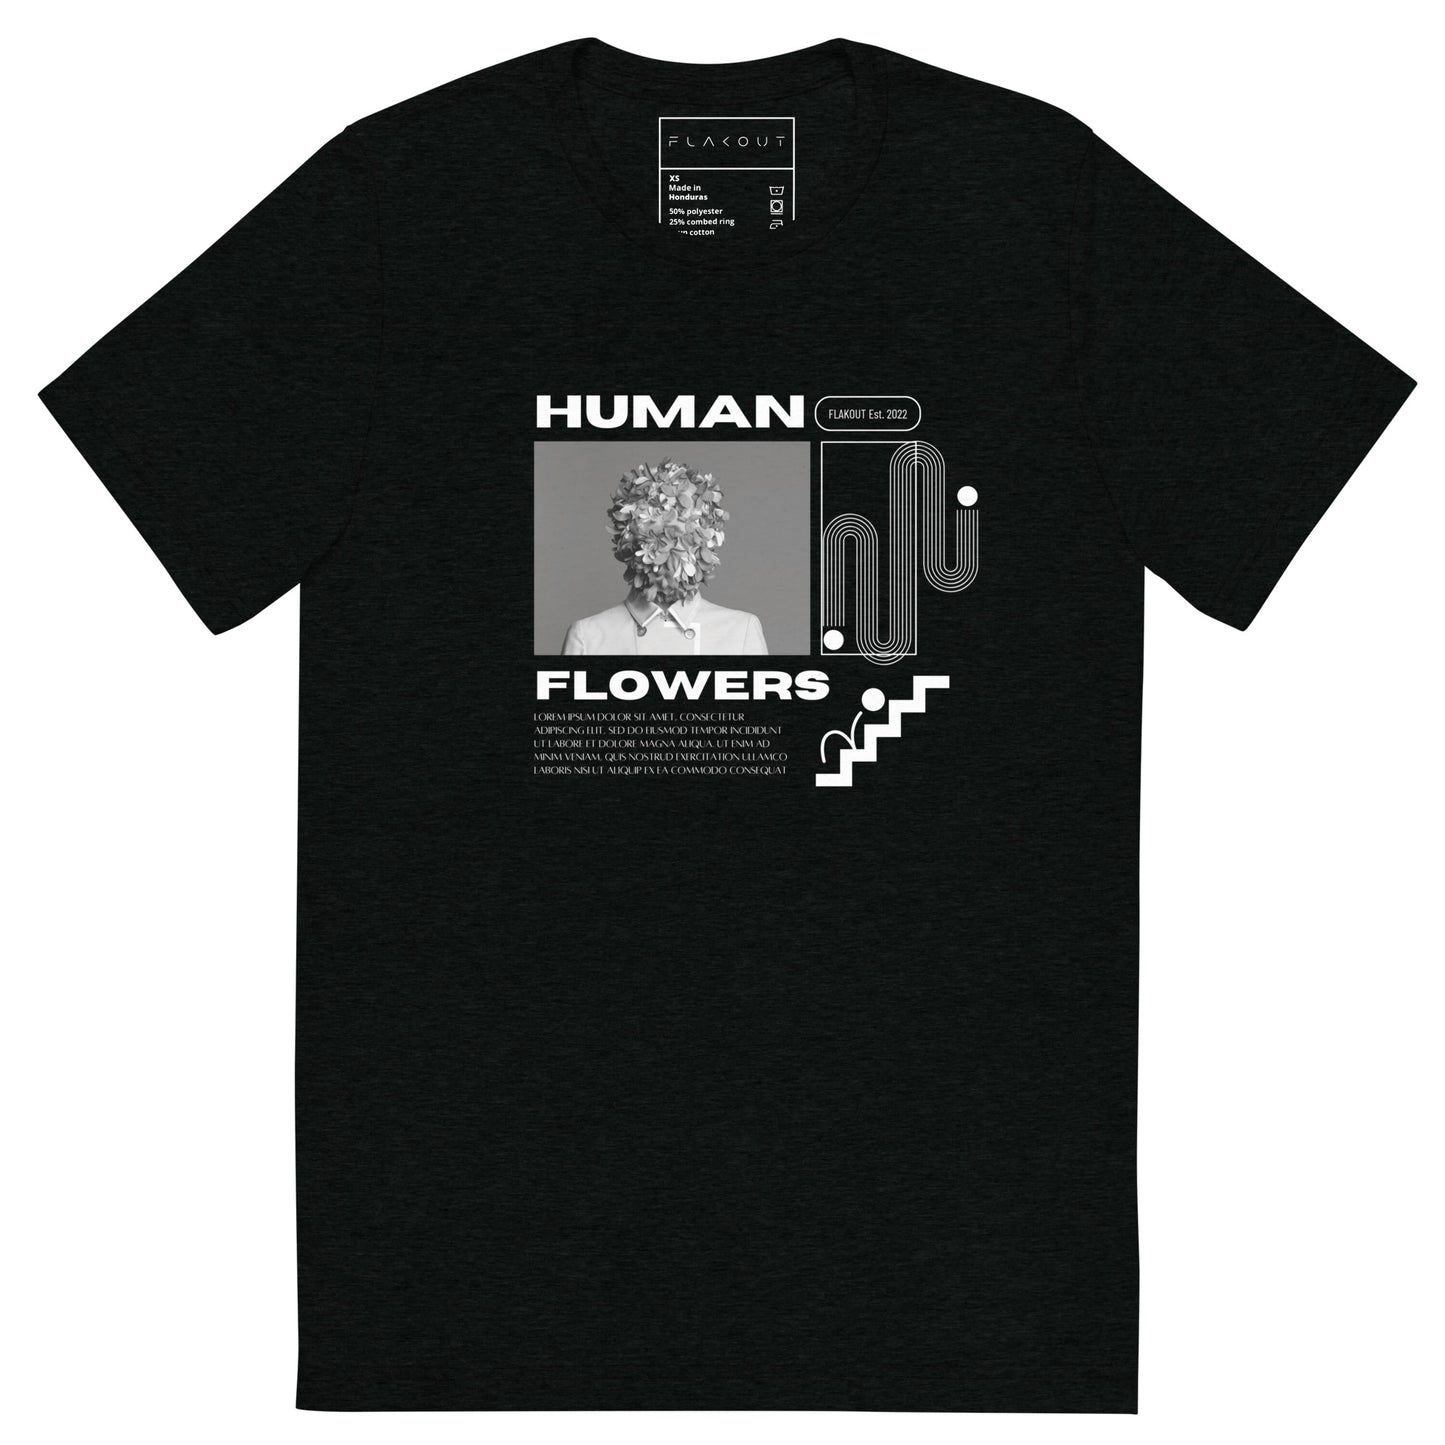 Human Flowers Floral Blooming T-shirt